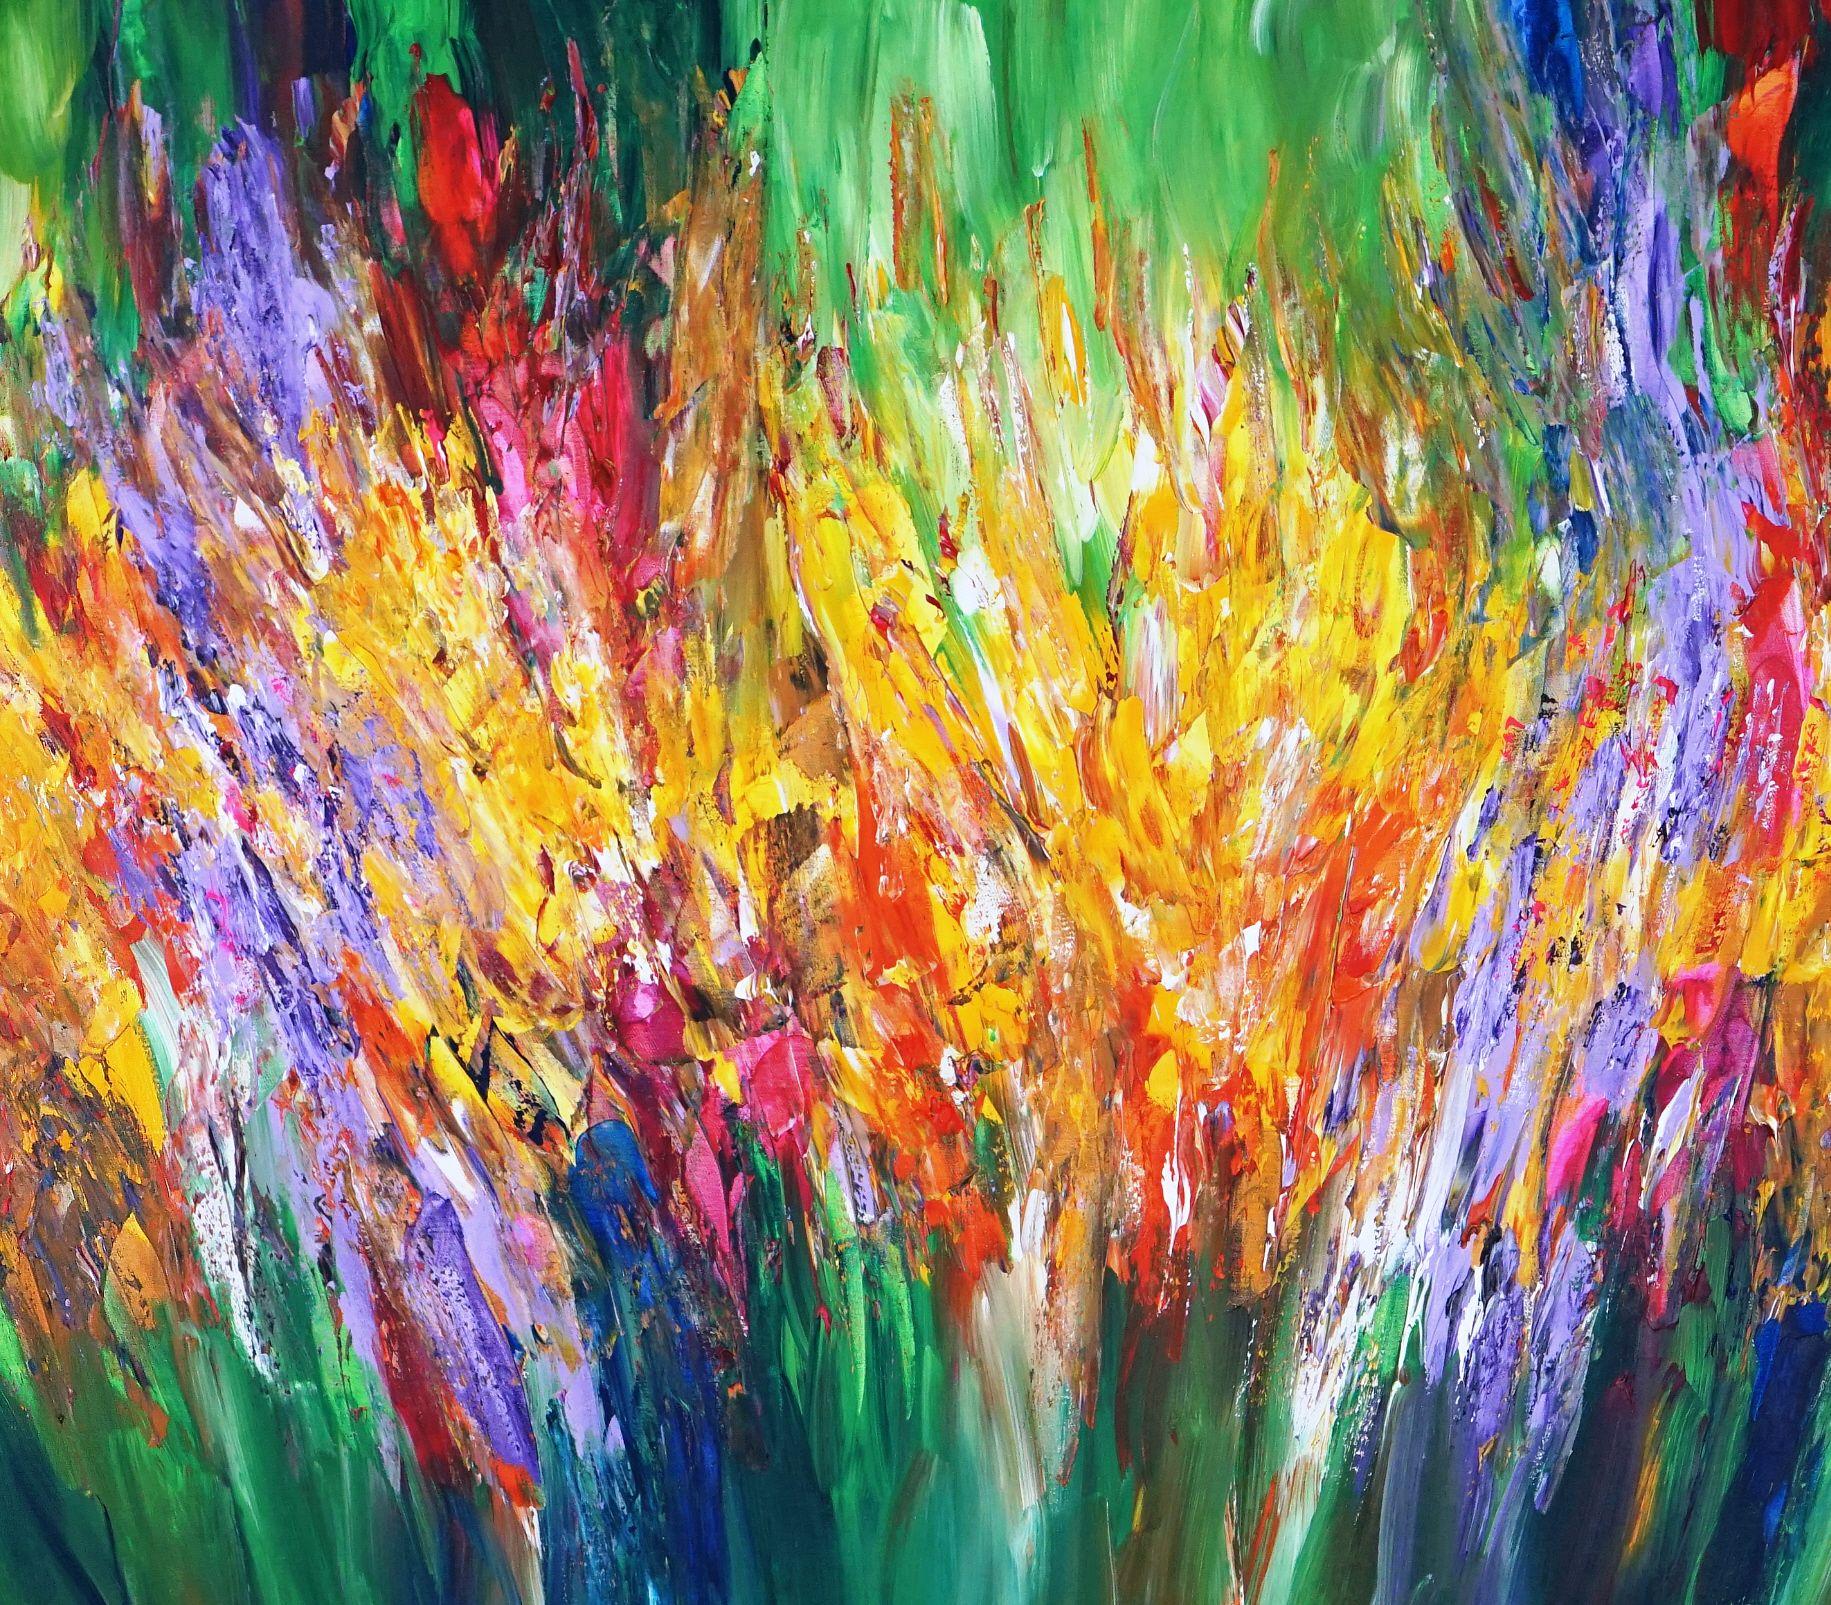 Abstract painting with an organic-floral character. Against a rich green background, a vibrant color formation unfolds in shades of yellow, white, beige, brown, orange, red, magenta, pink, lavender, violet and blue. The picture is rich in details